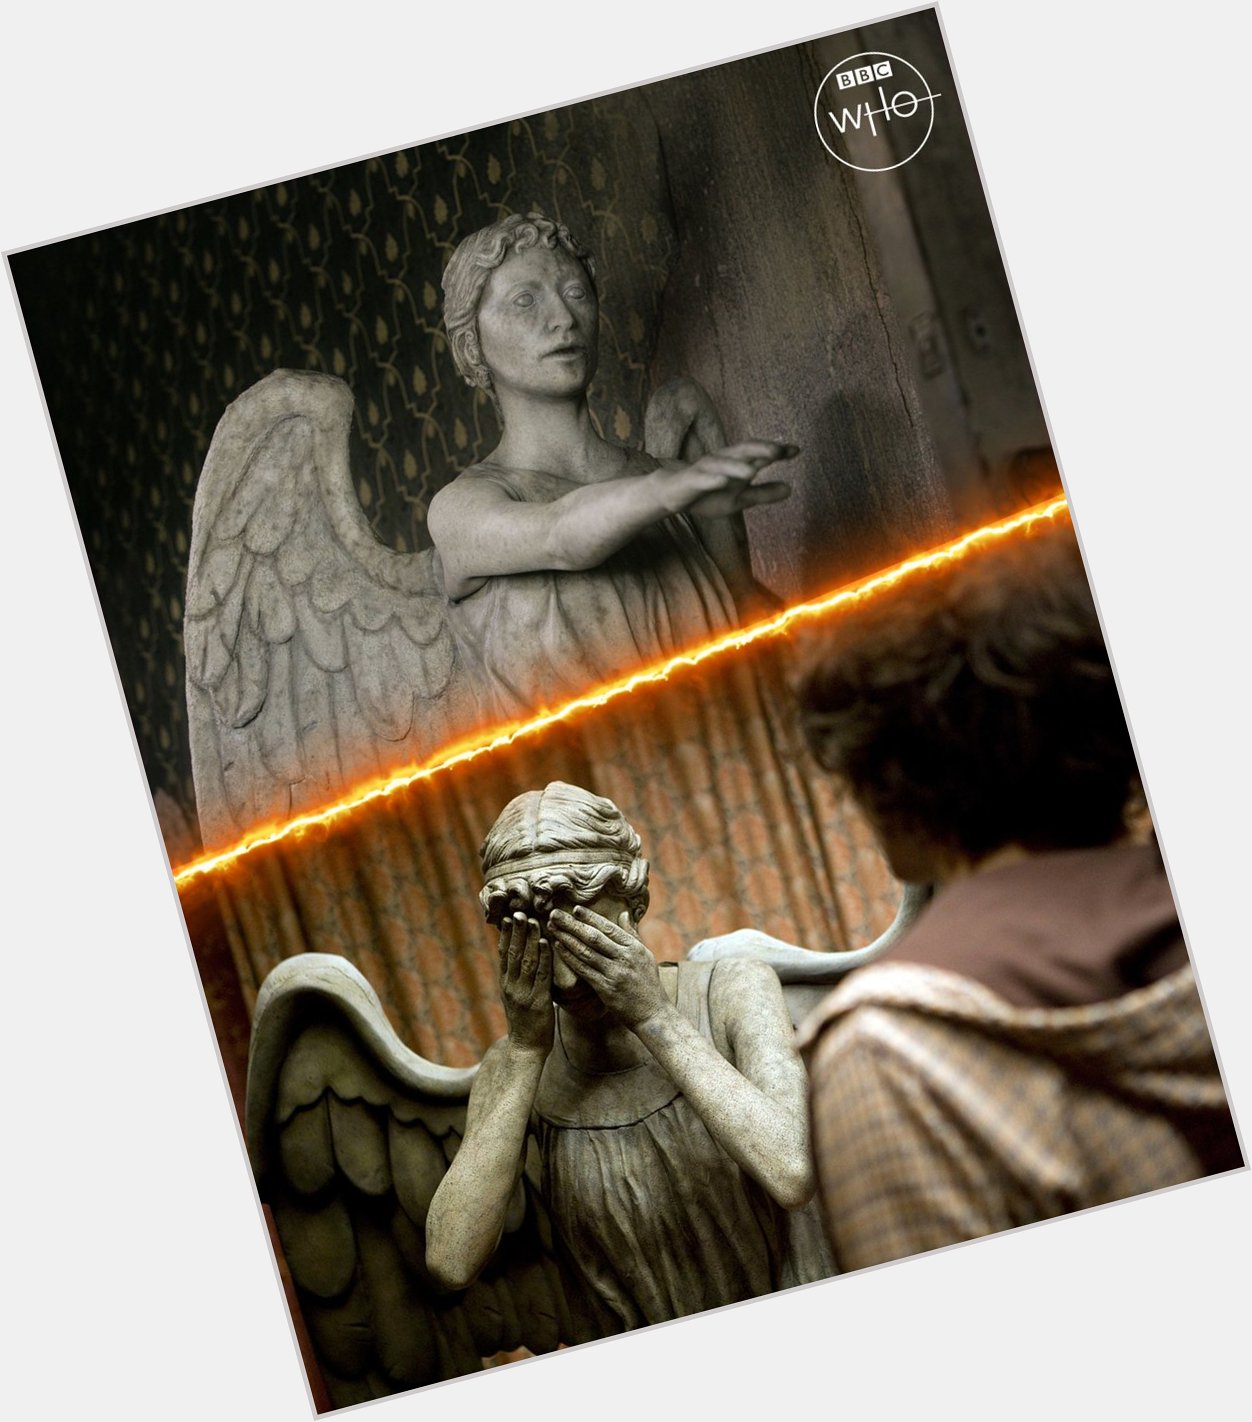 Wishing a very happy birthday to former showrunner, and creator of the Weeping Angels, Steven Moffat!  